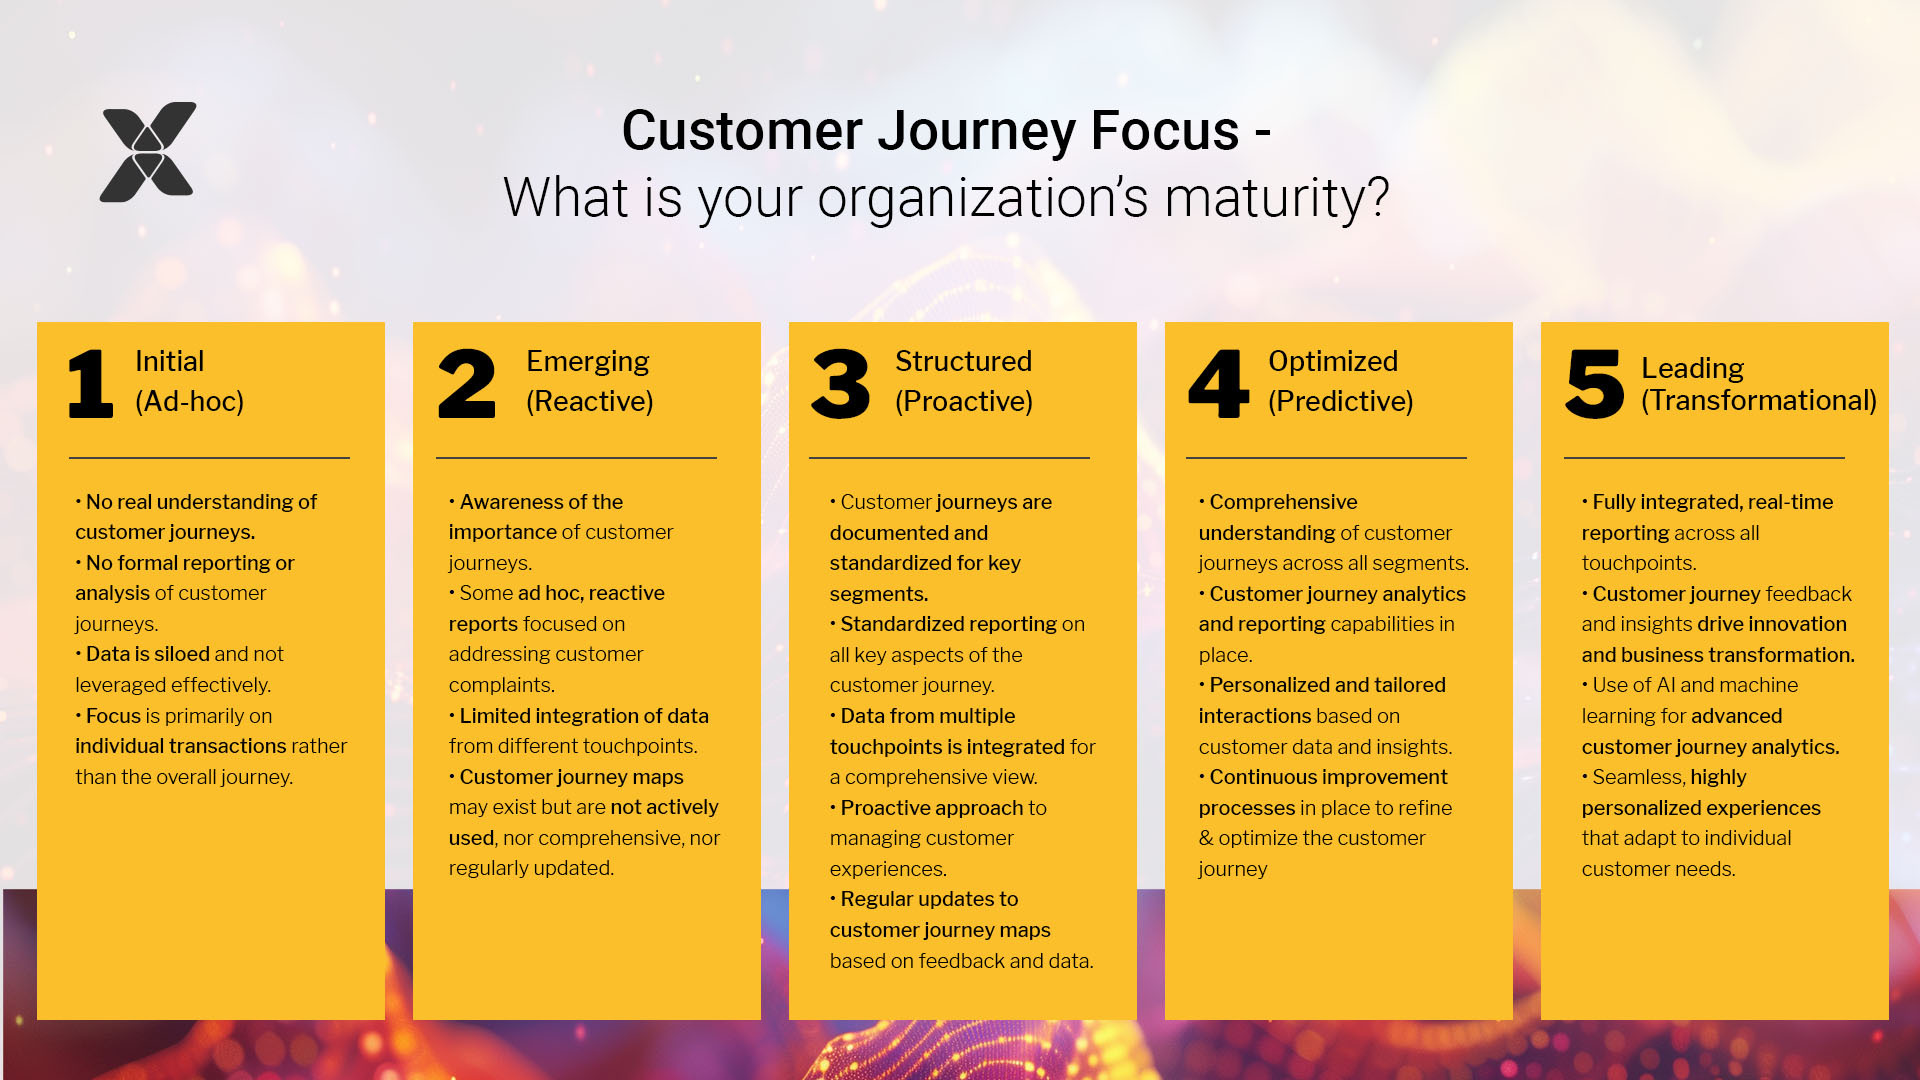 table about determing organizational maturity in terms of the customer journey